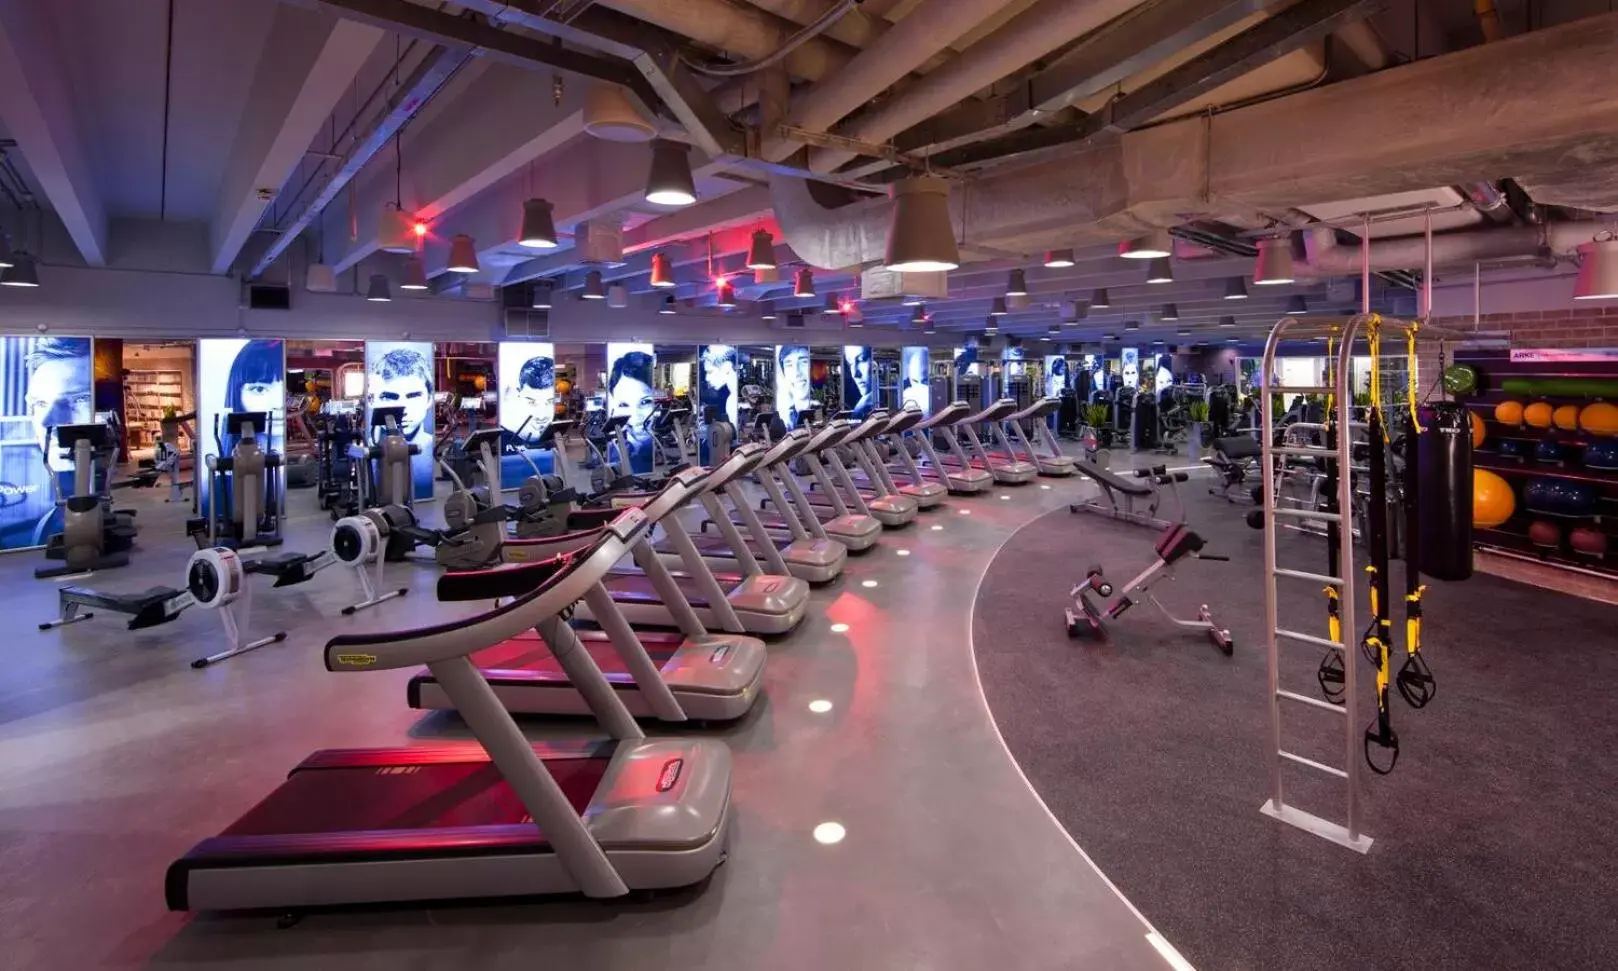 Fitness centre/facilities in Jumeirah Emirates Towers